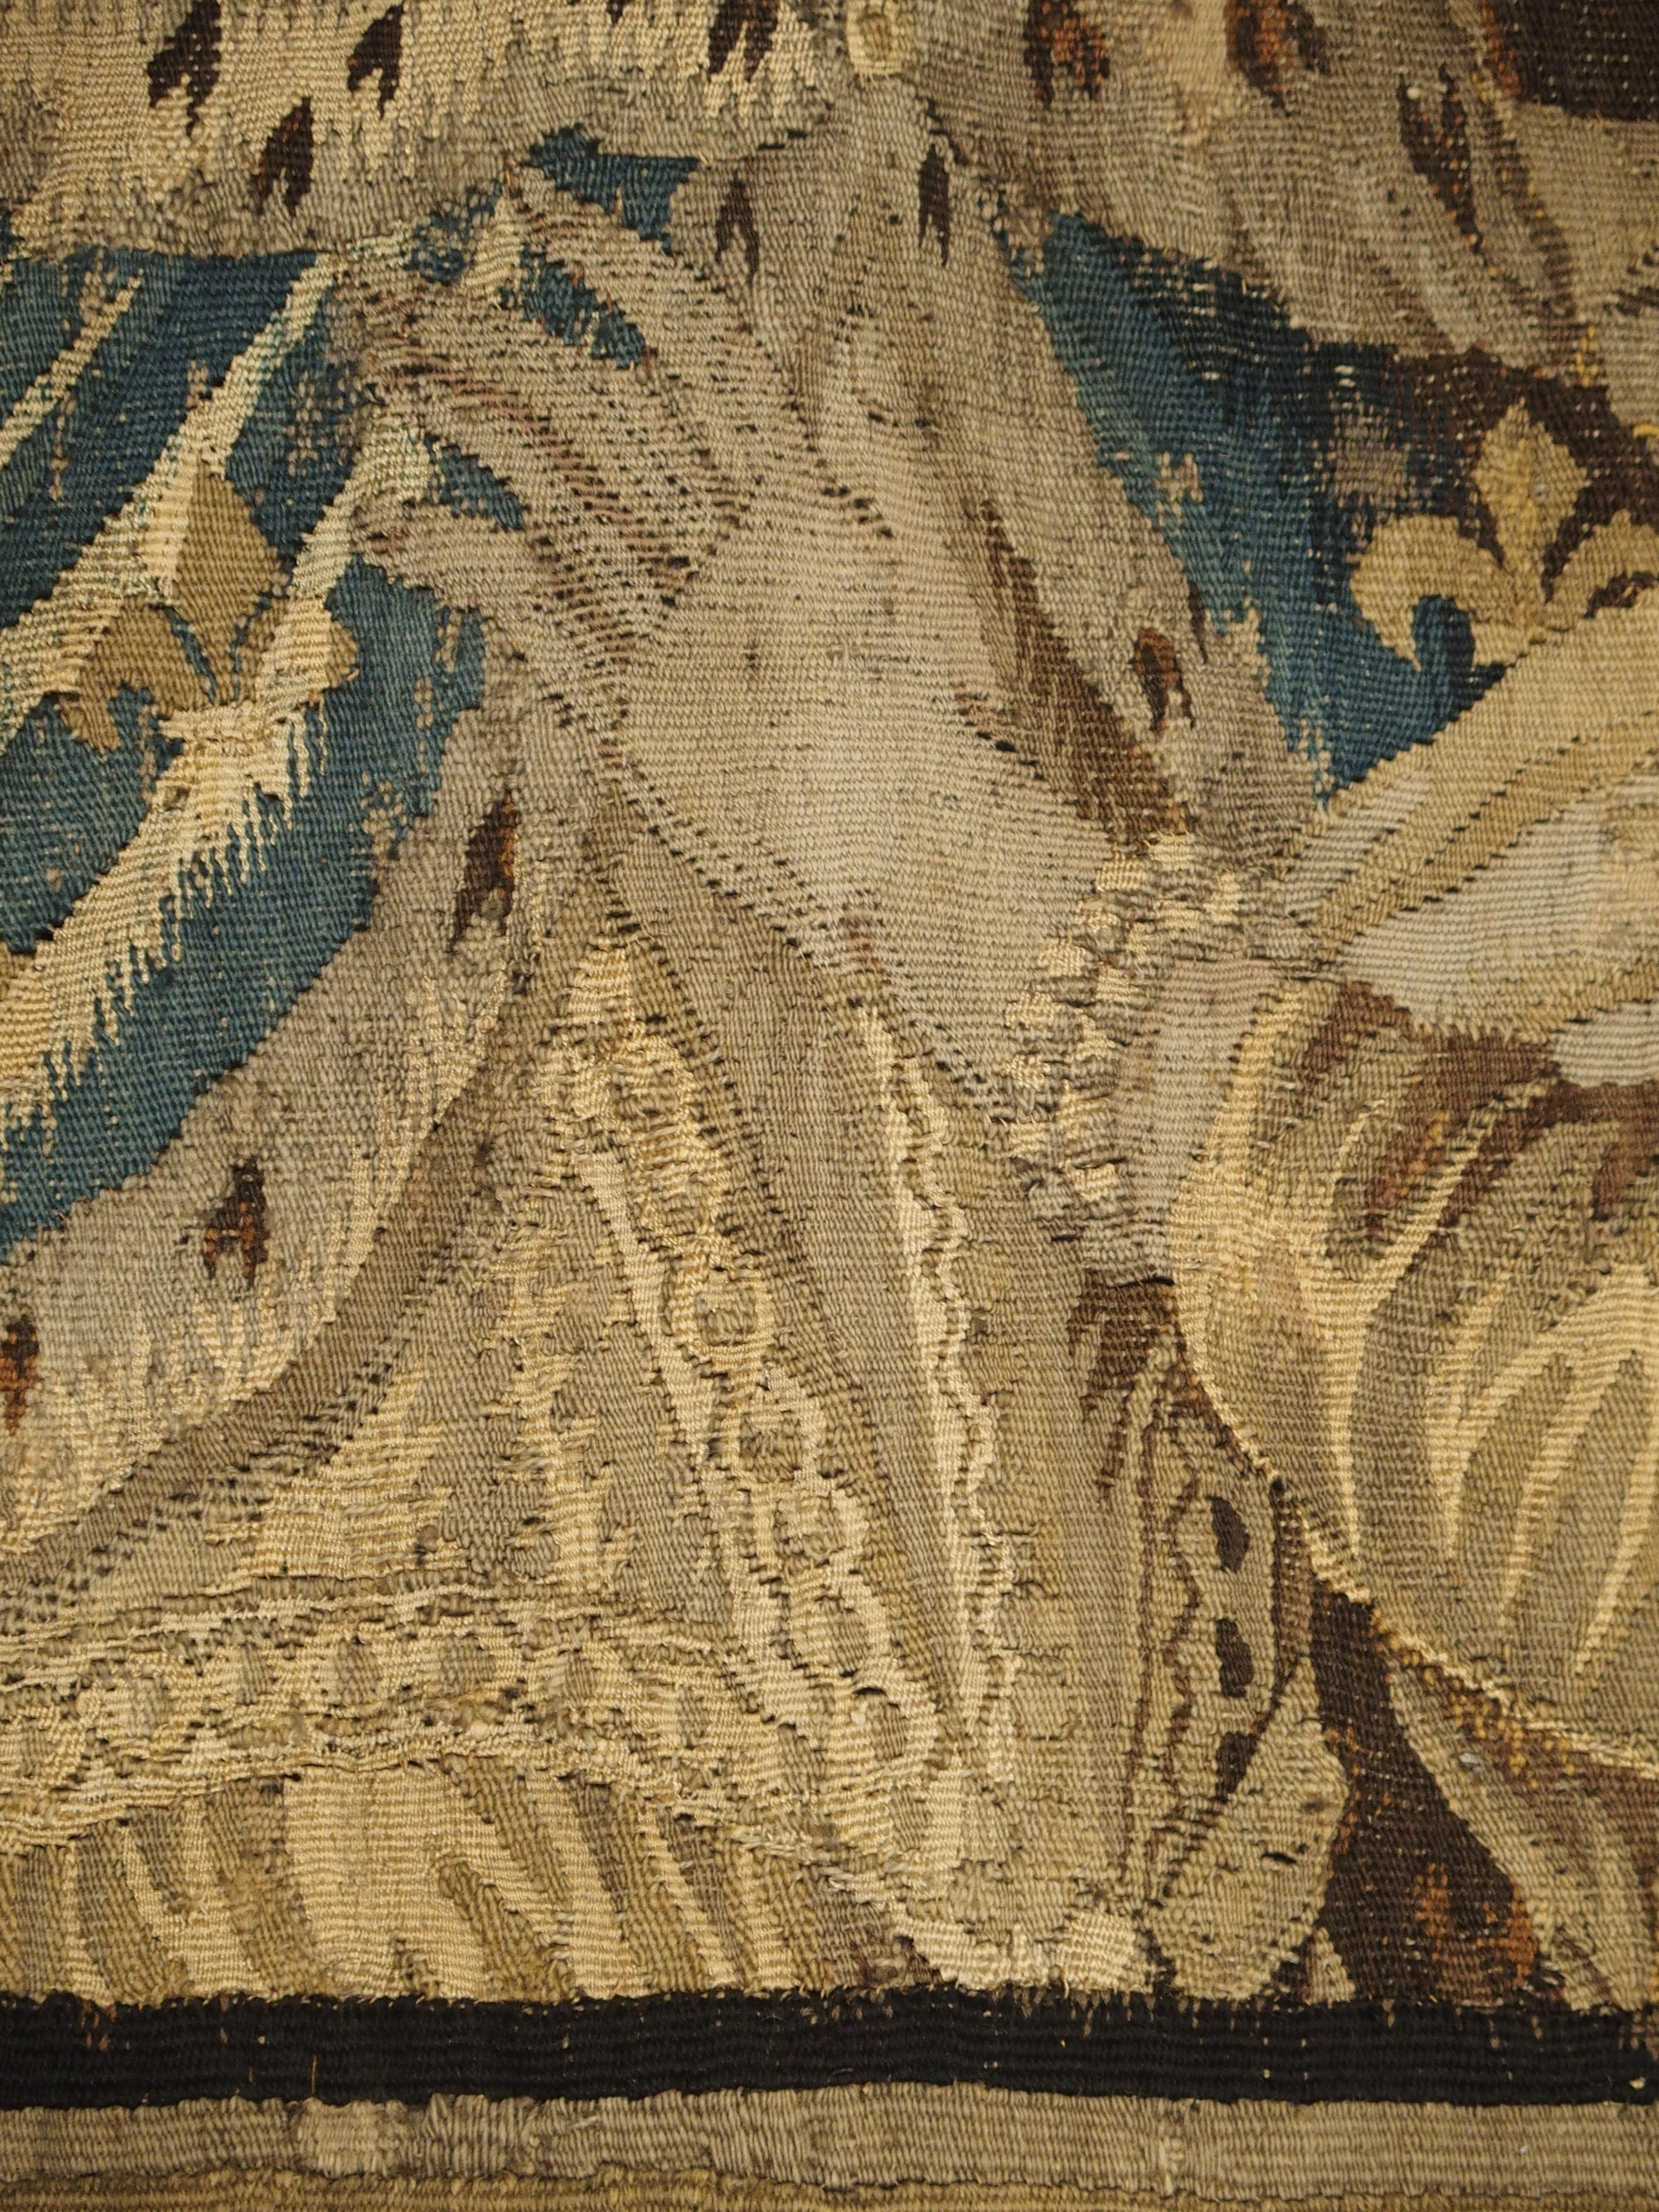 17th Century Tapestry Fragment with Ornate Border 6